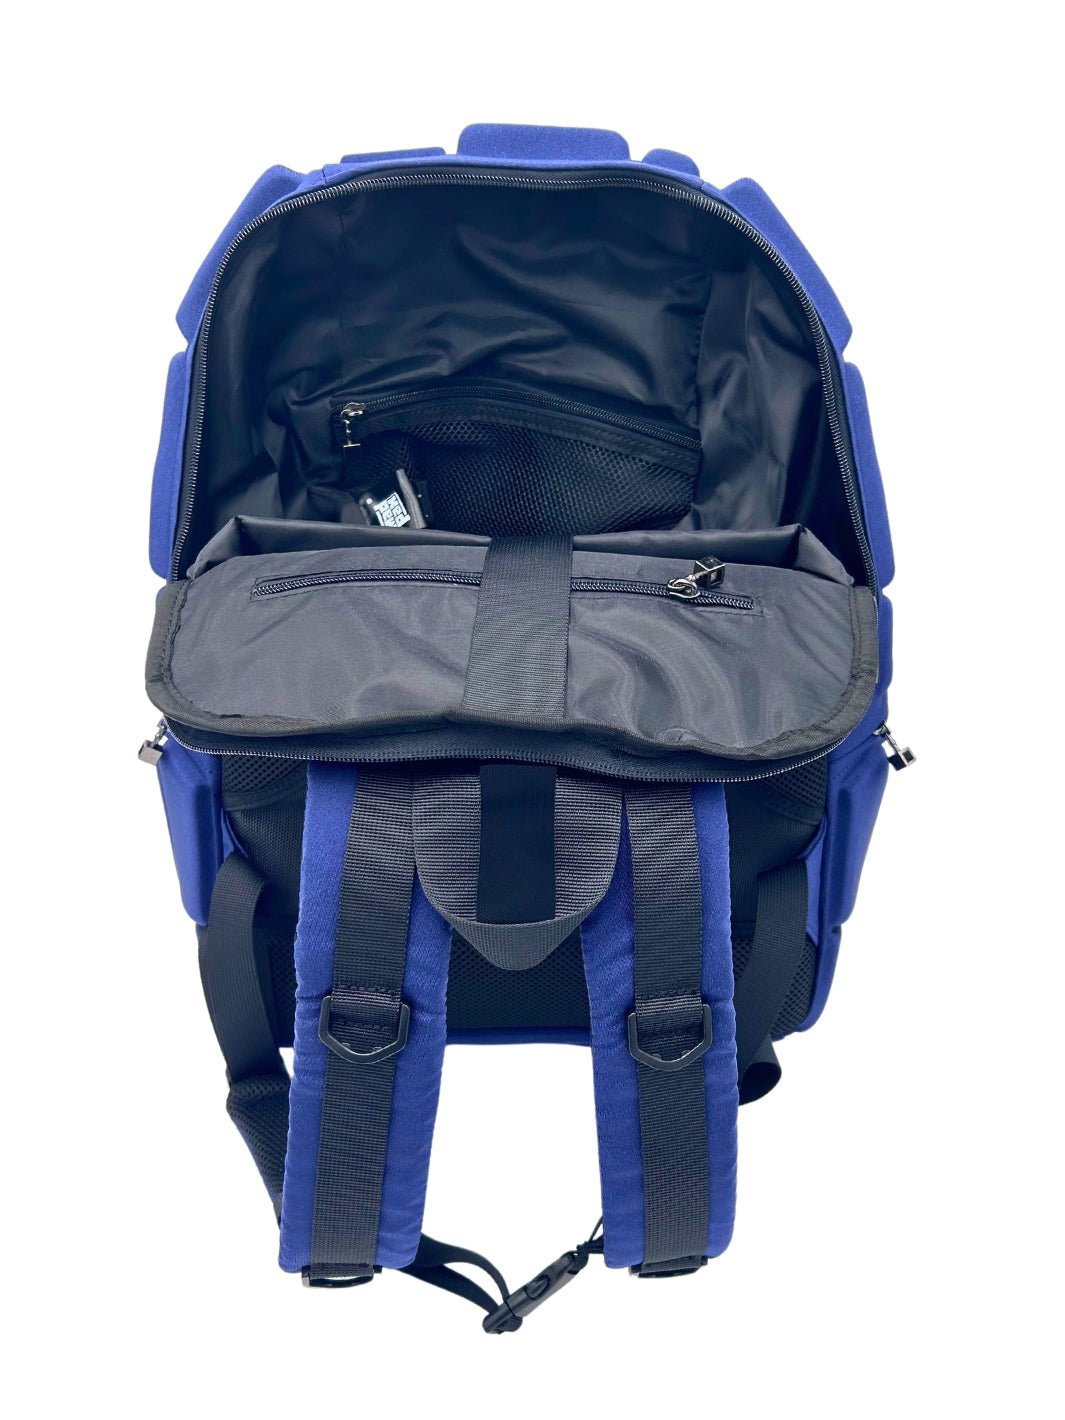 Inside view of Wild Blue Yonder navy blue ackpack - Madpax